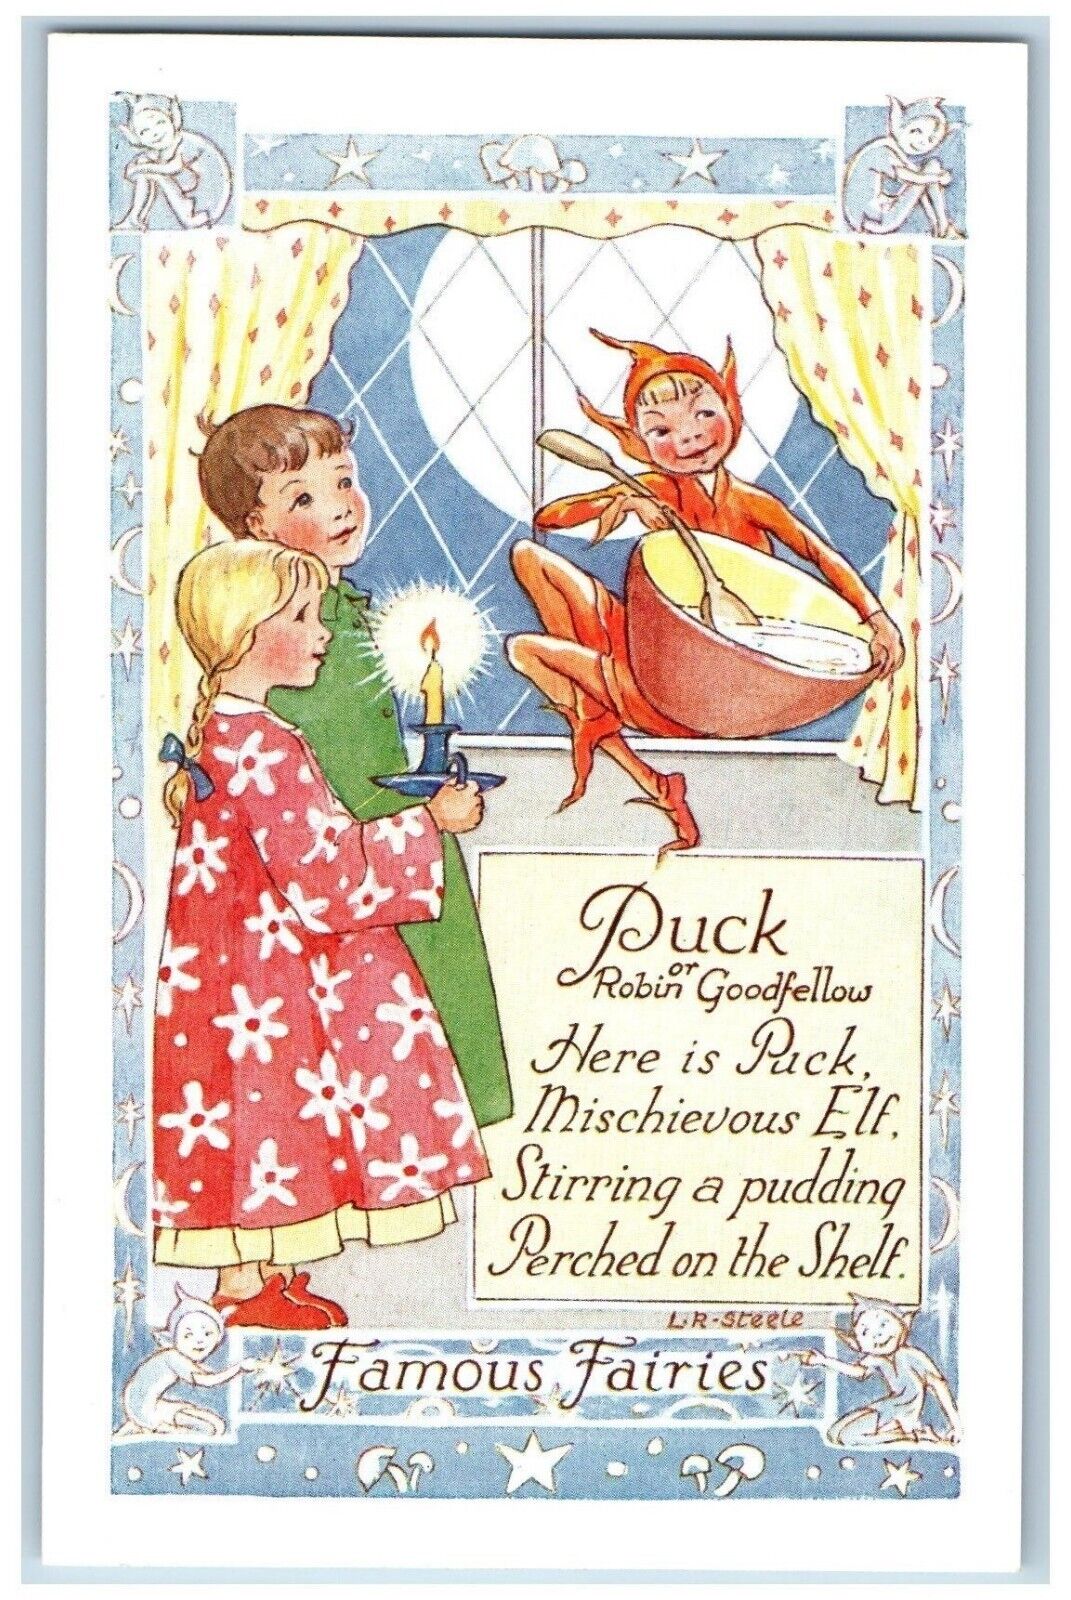 Famous Fairies Postcard Puck Robin Or Goodfellow Candle Fantasy c1910's Antique